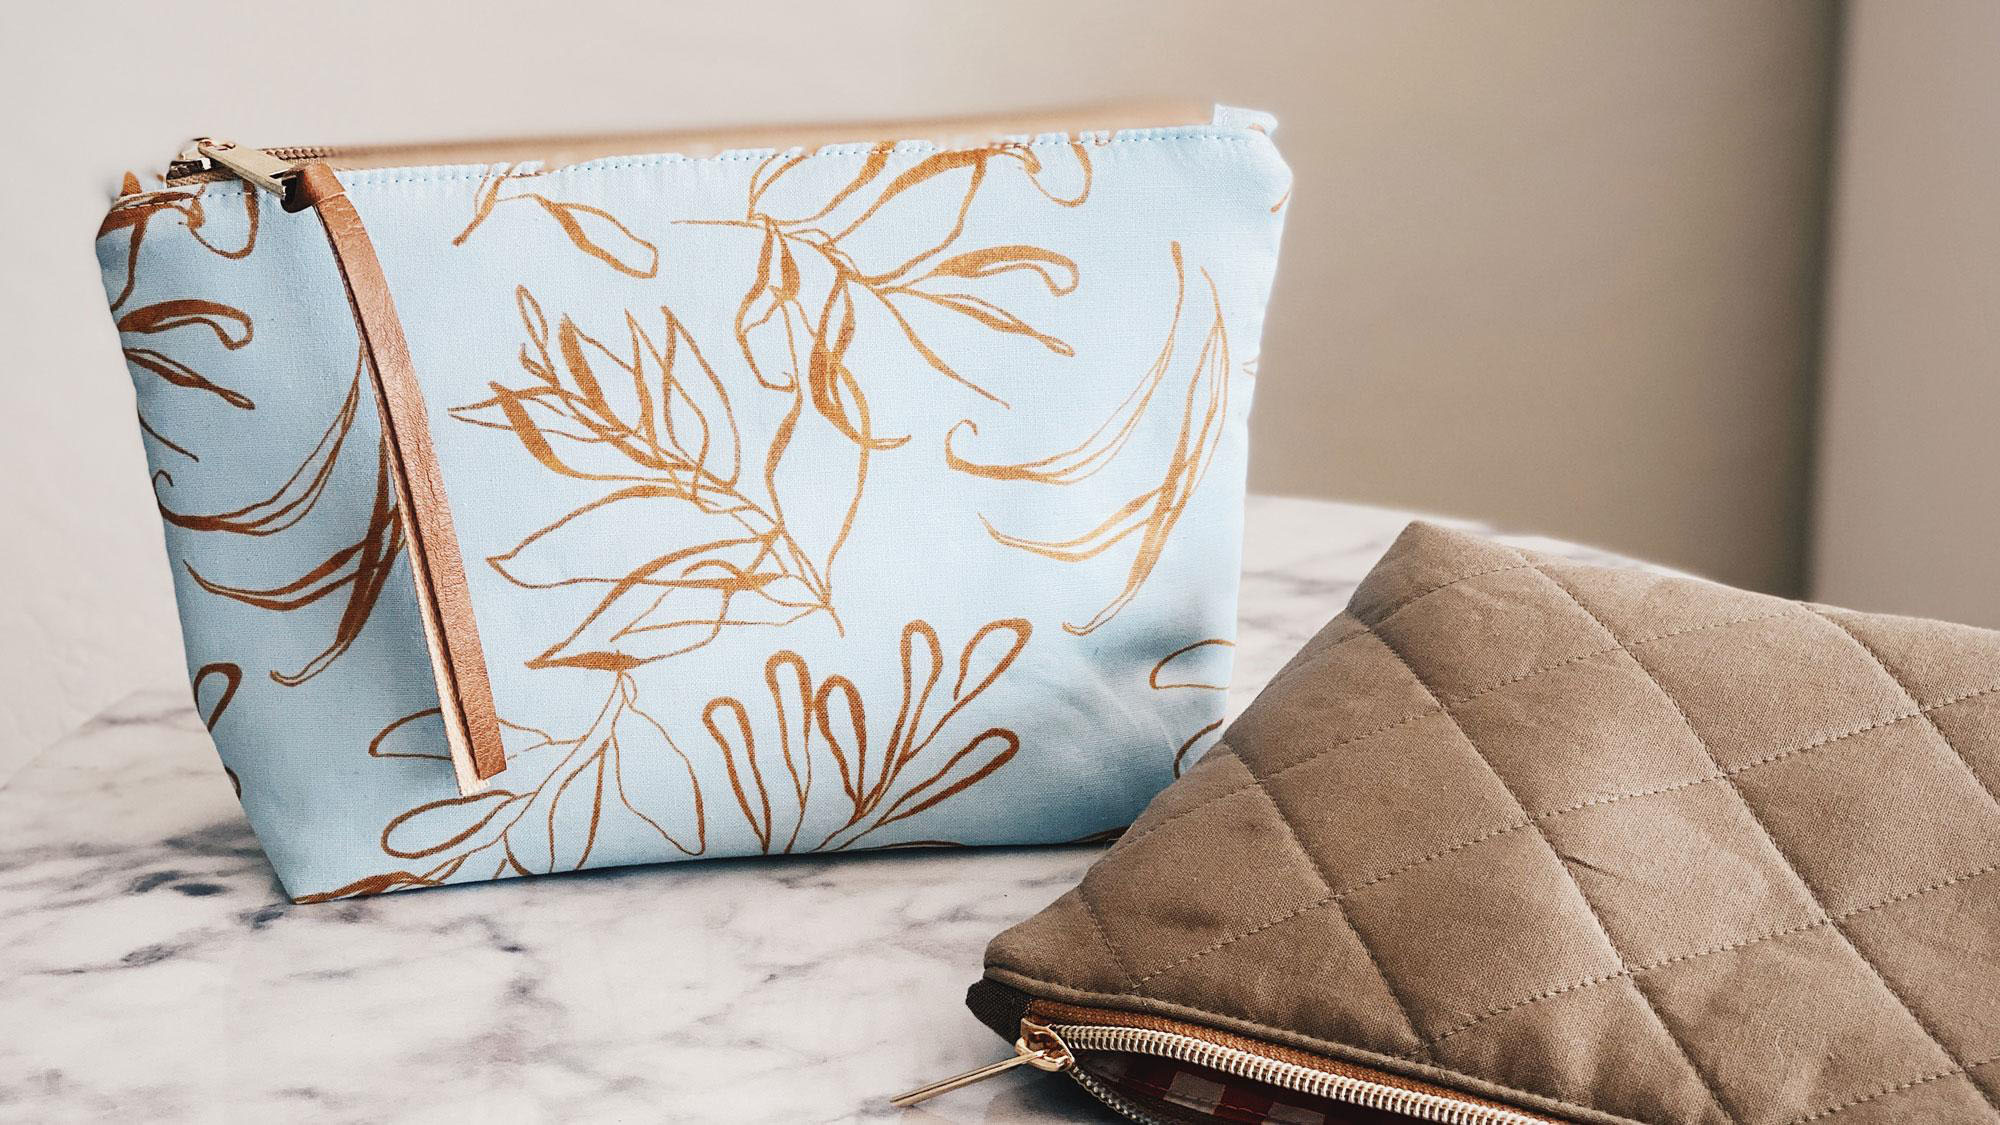 A blue, zippered pouch covered in abstract gold leaves sits on a white marble table. A brown, quilted and zippered pouch lies on its side next to the blue pouch.